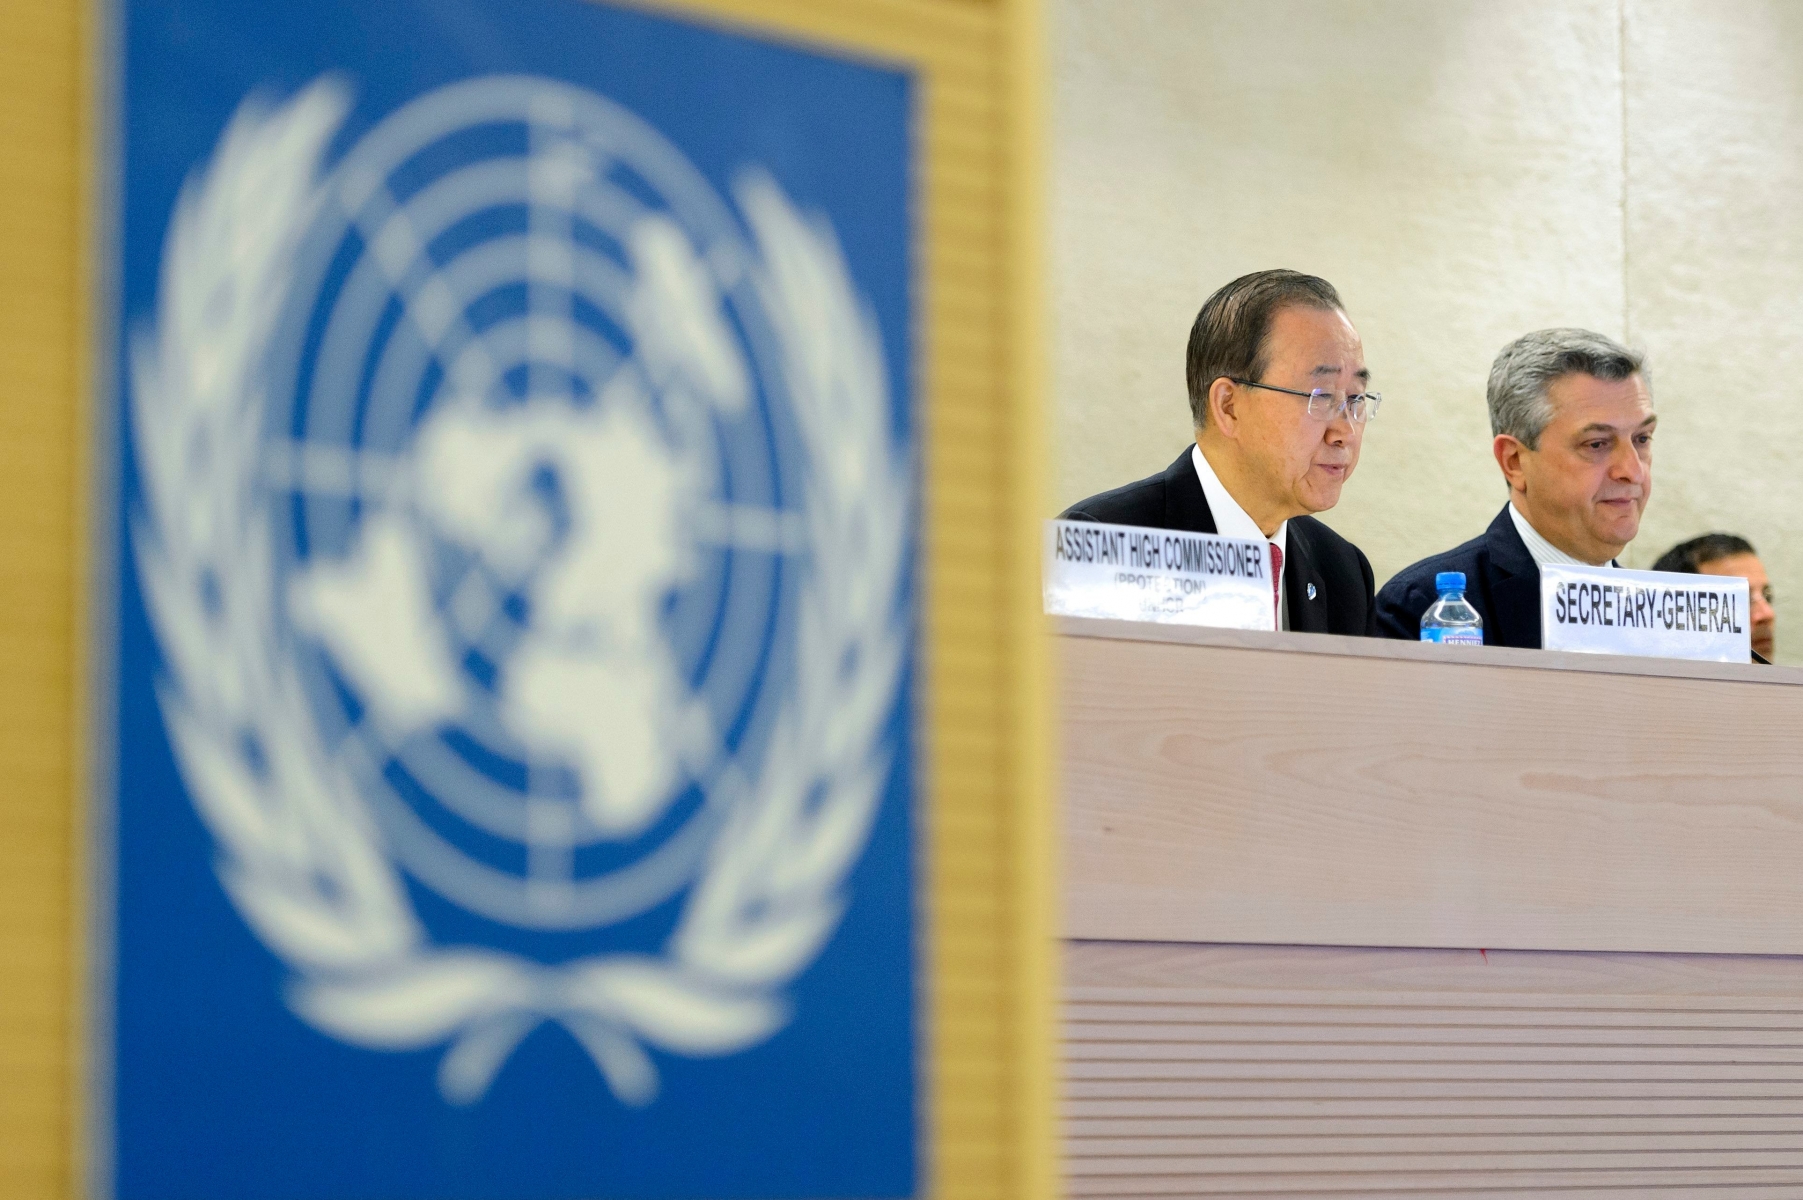 United Nations Secretary-General Ban Ki-moon, left, and United Nations High Commissioner for Refugees, UNHCR, Italian Filippo Grandi, right, listen during the meeting on global responsibility sharing through pathways for admission of Syrian refugees, at the United Nations in Geneva, Switzerland, Wednesday, March 30, 2016. The UNHCR is hosting a high-level Conference in Geneva that will focus on refugees from Syria, and the need to generate a substantial increase in resettlement and other answers for their plight. (KEYSTONE/Martial Trezzini) SWITZERLAND UNHCR REFUGEES SYRIAN